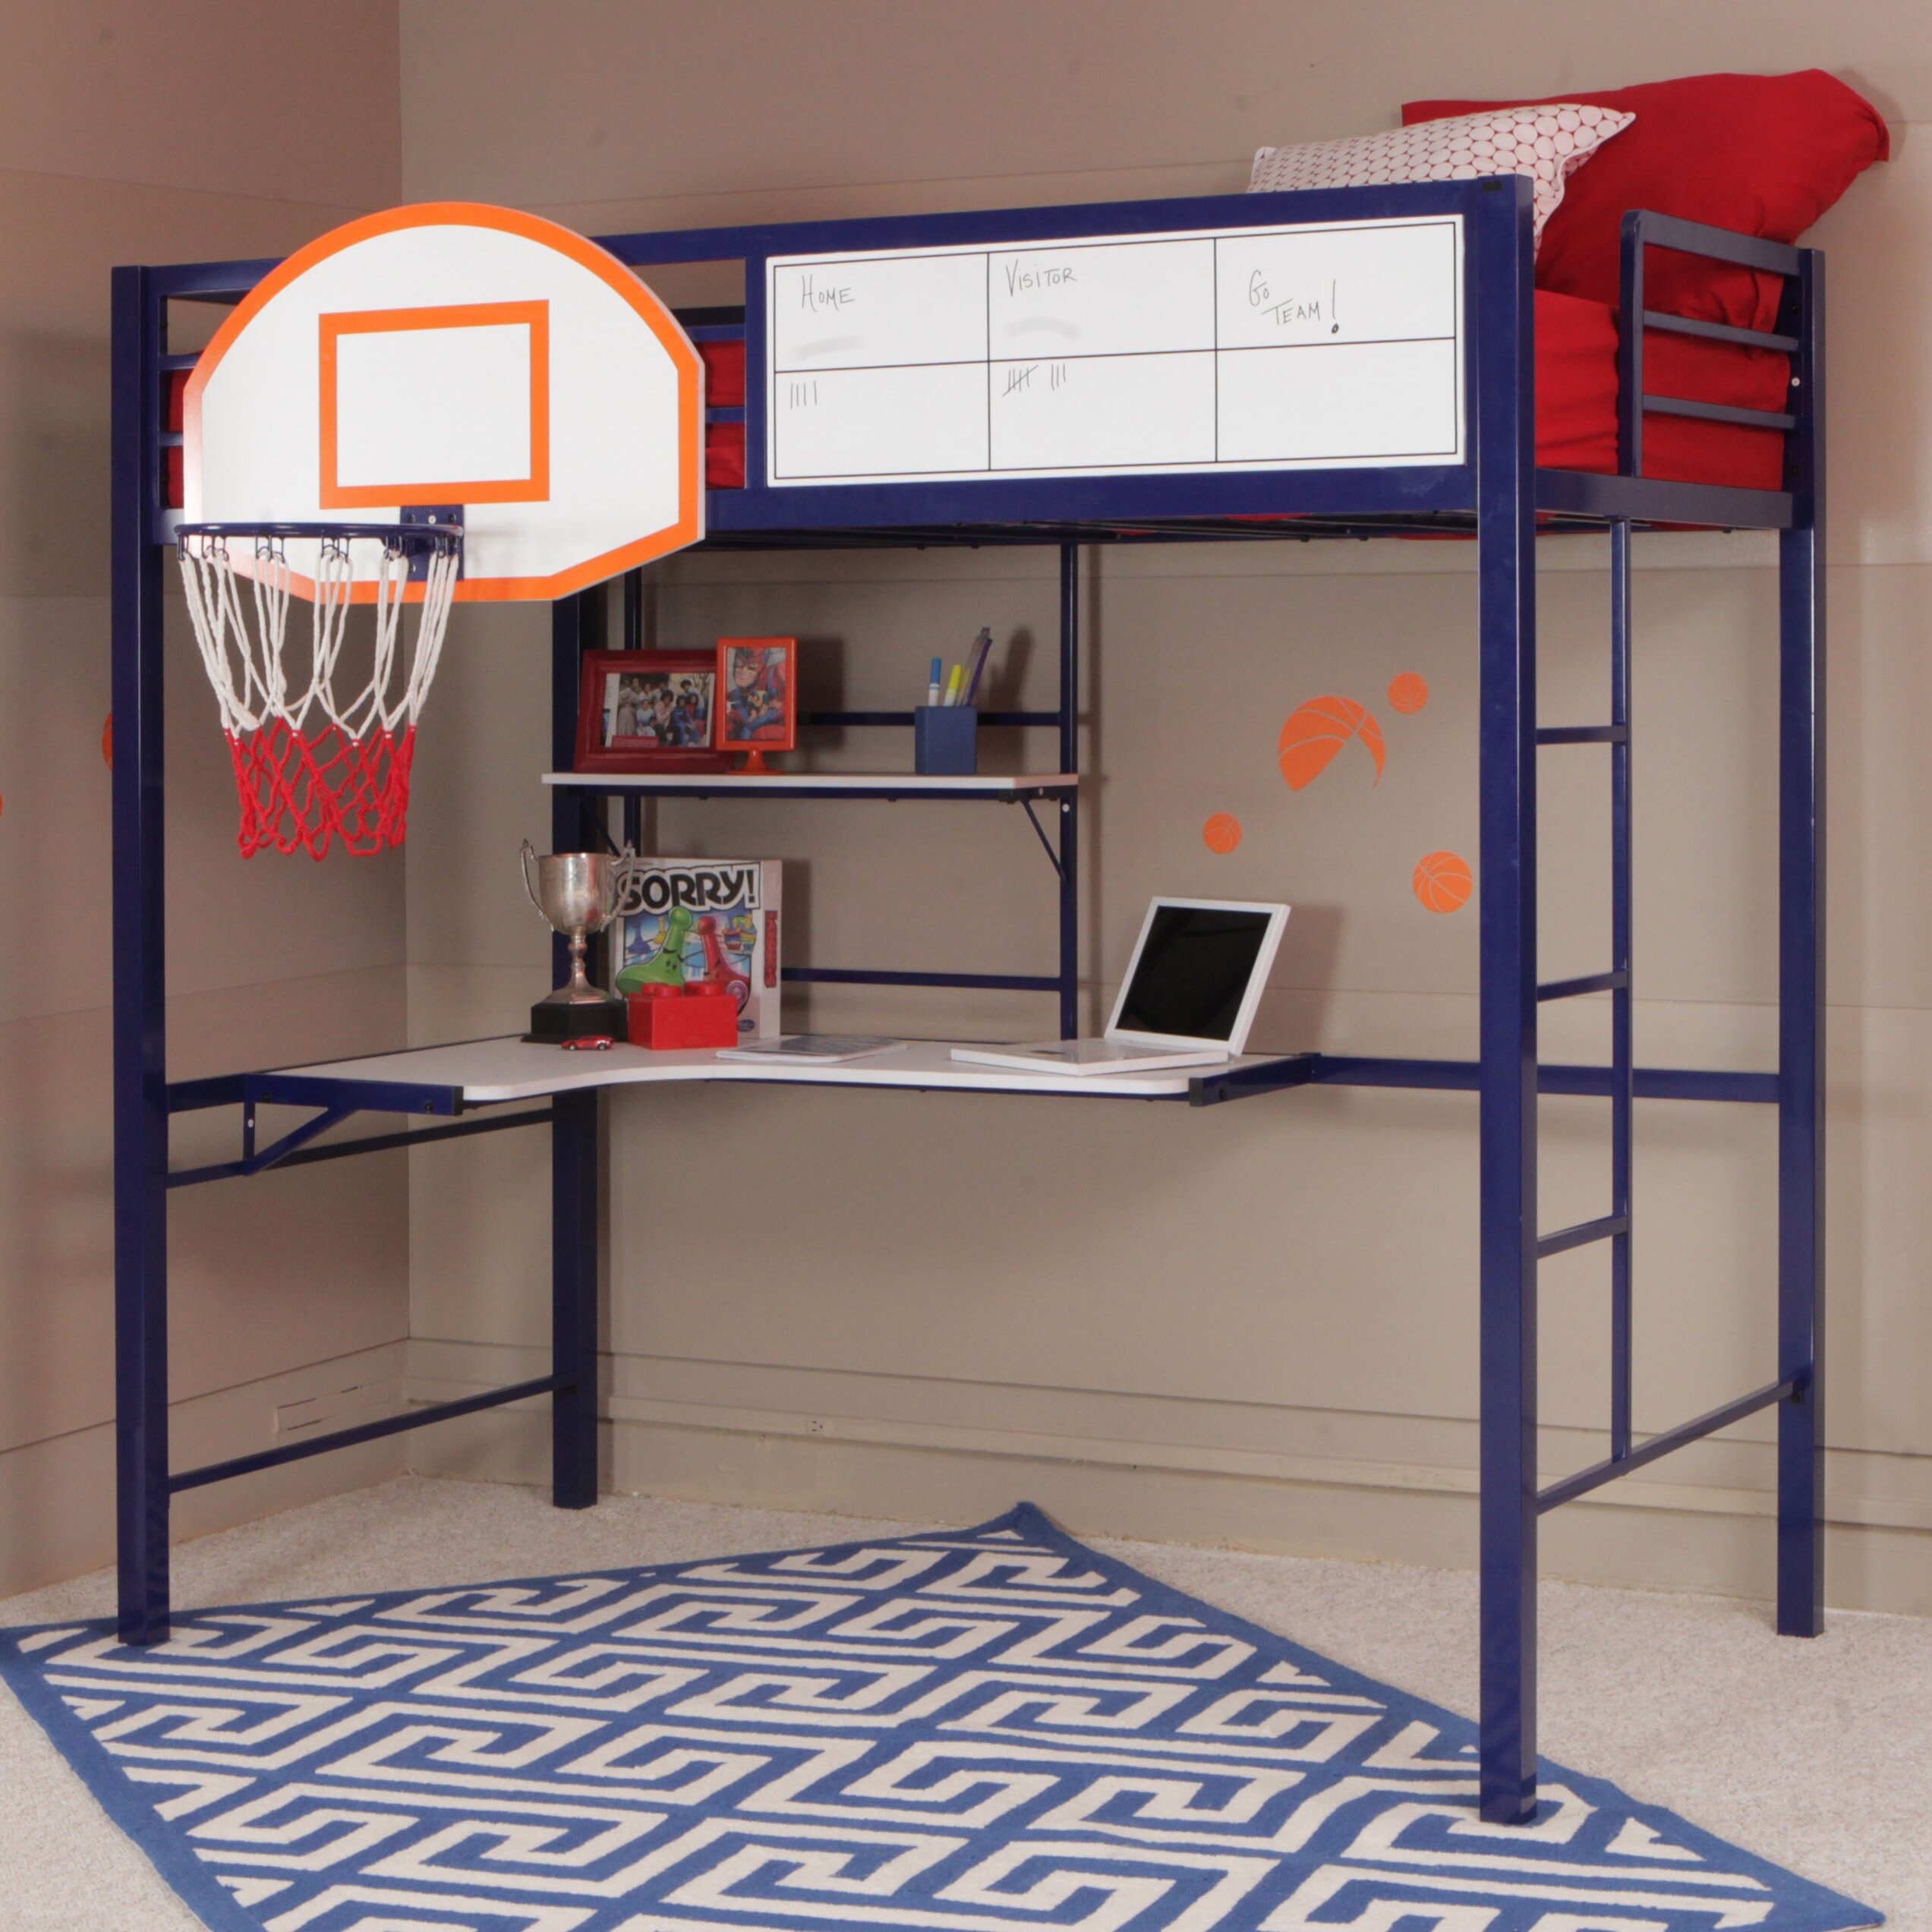 Hoops Basketball Twin Loft Bed with Desk